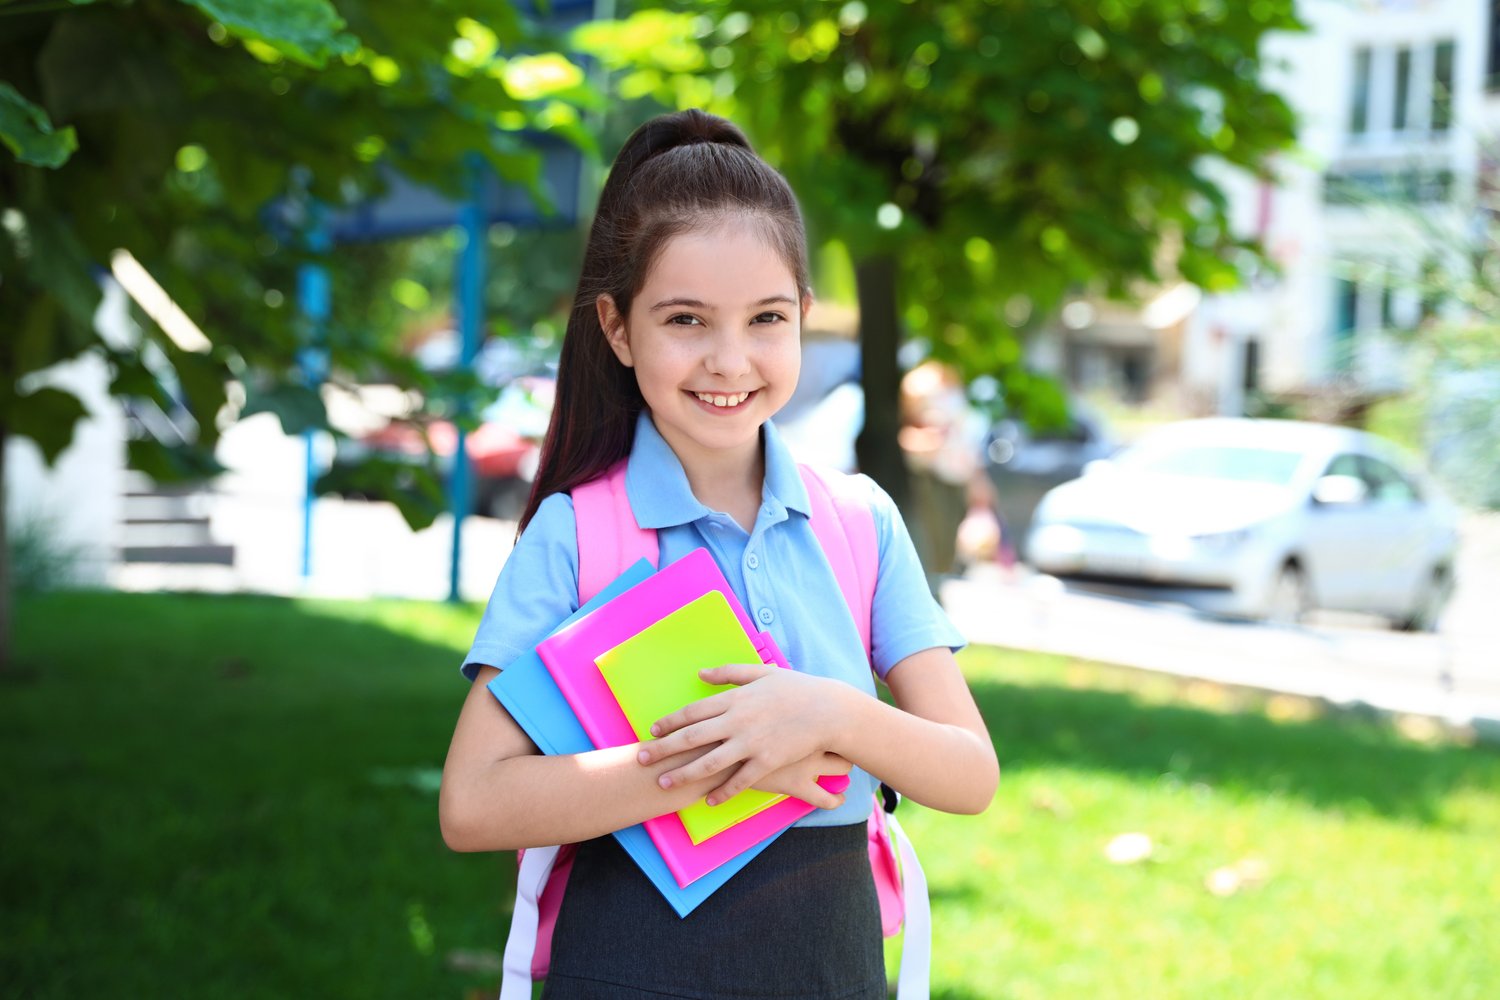 How to Help Children Prepare for Their First Day at School